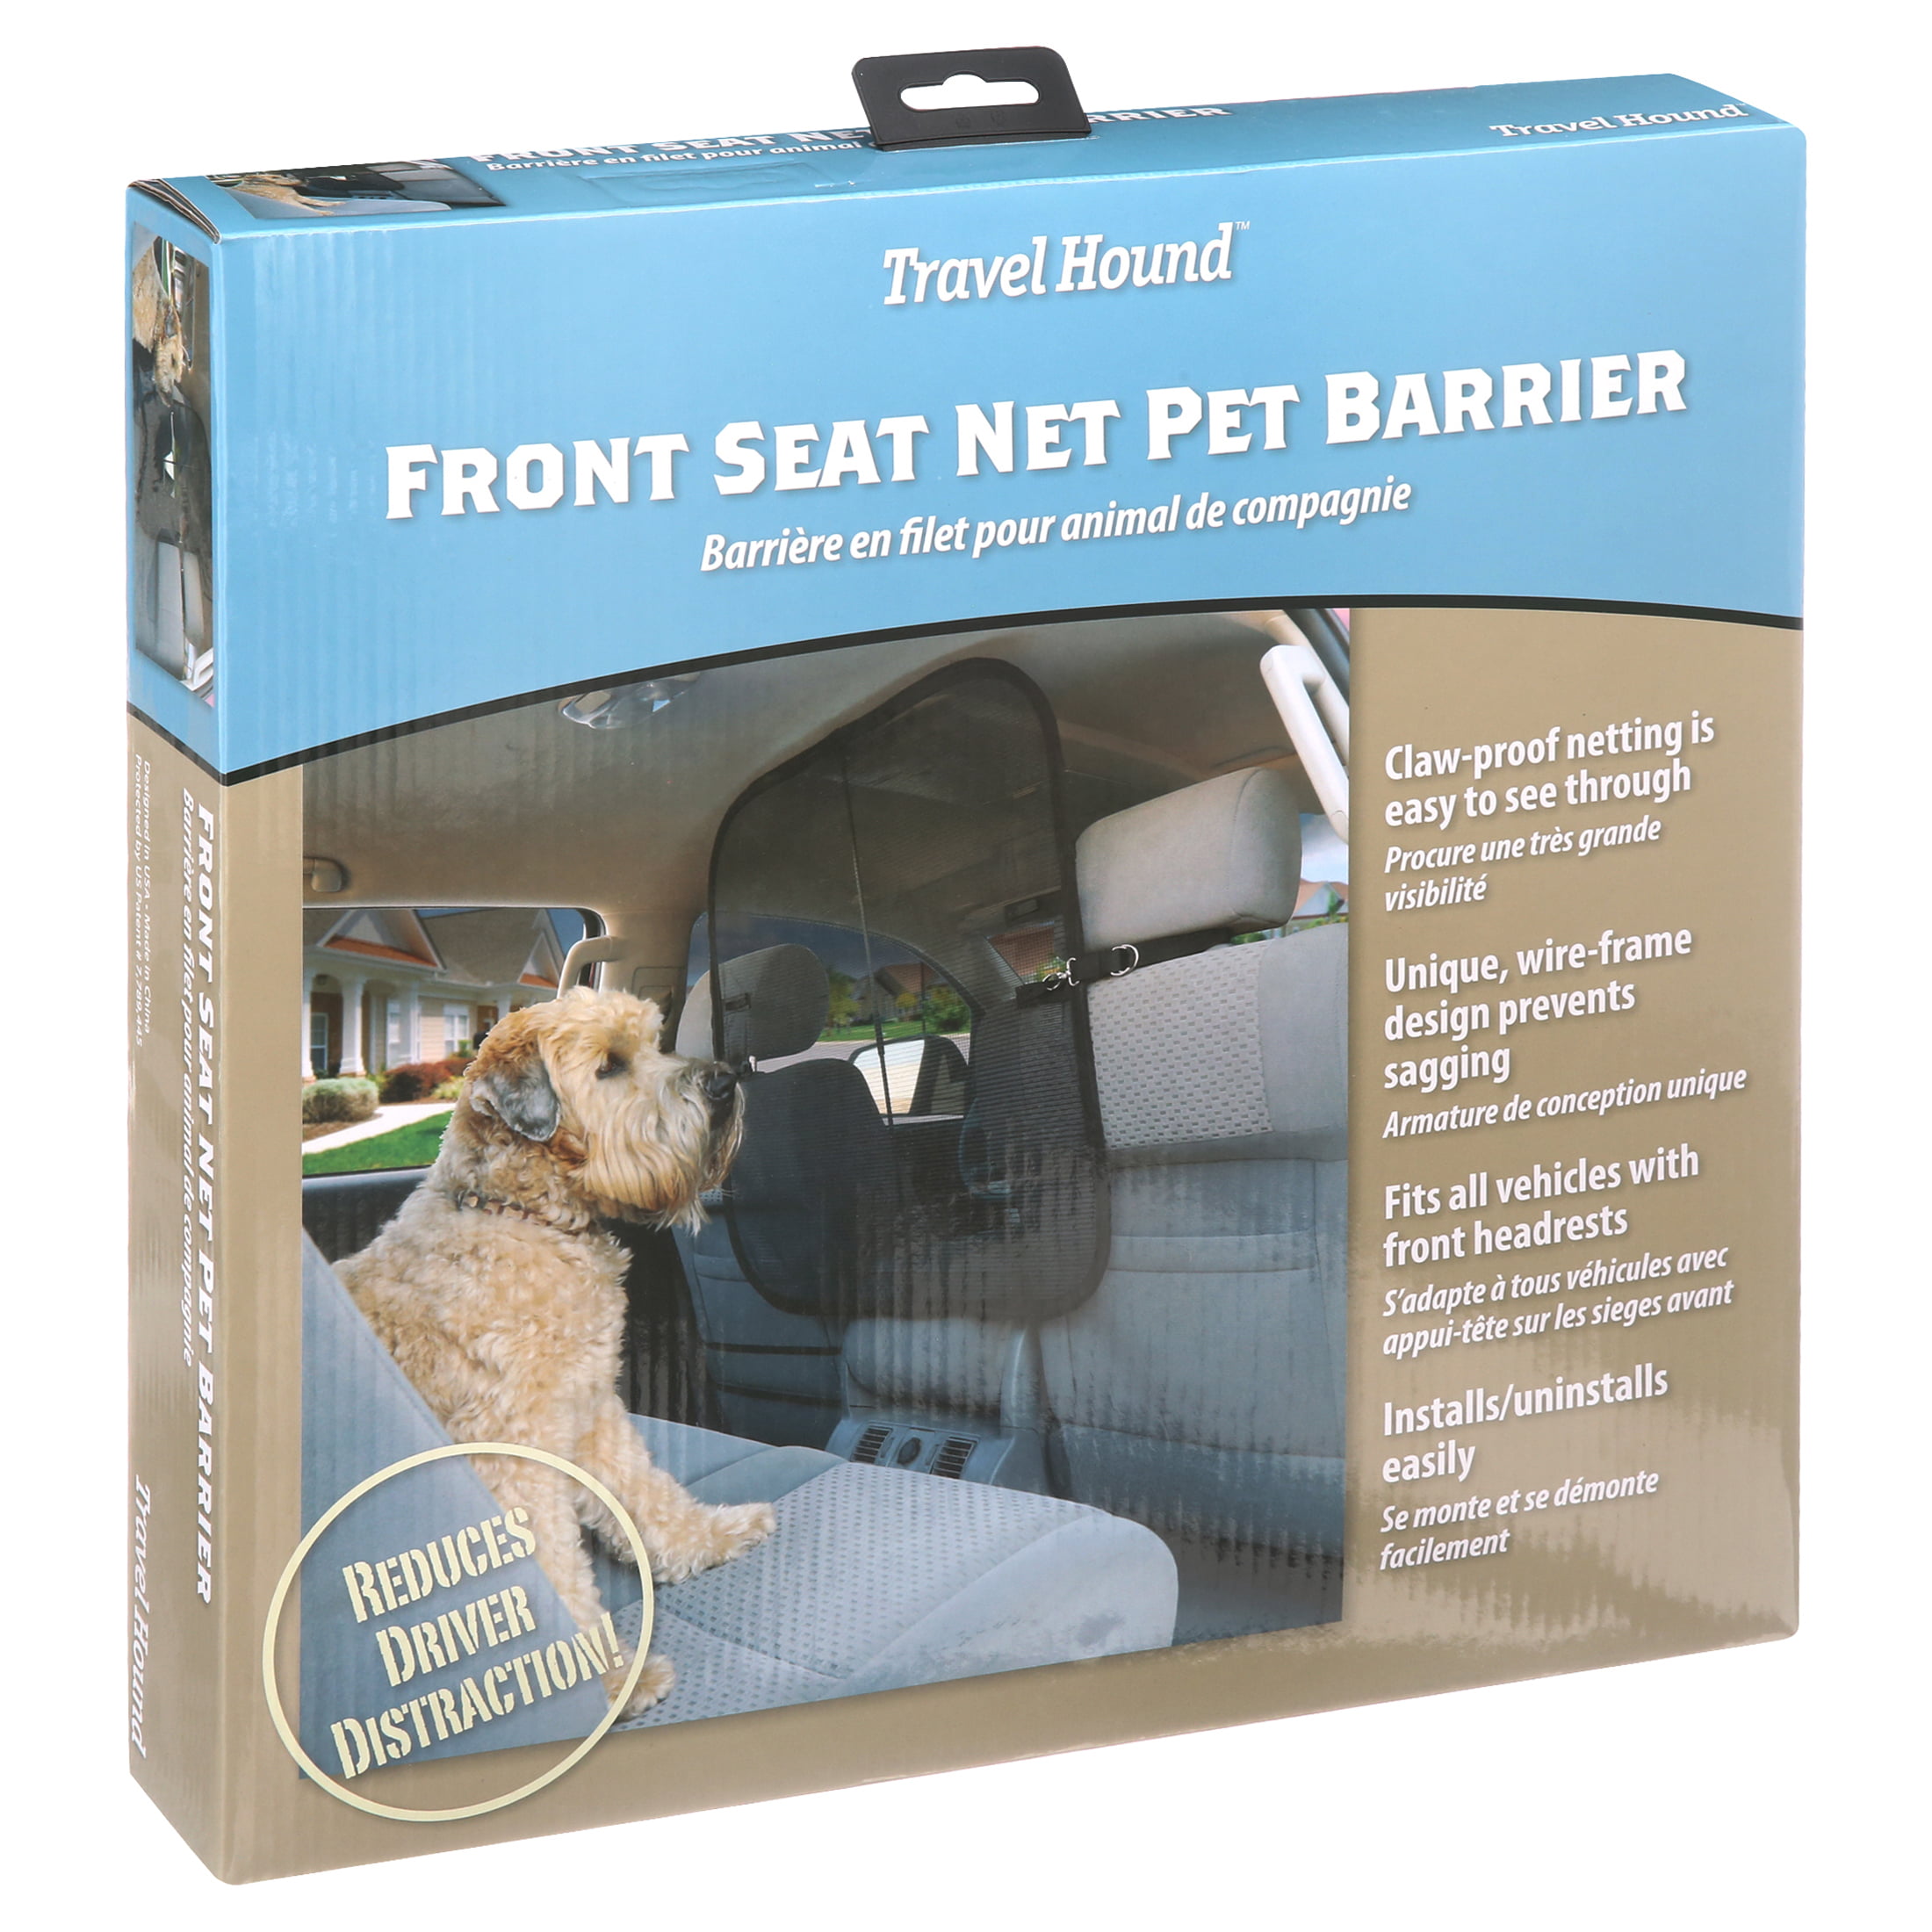 Pet Barrier Net and Screen Ergotech RDA65-XS8 Dog Guard guaranteed! for luggage and pets Safe comfortable for your dog